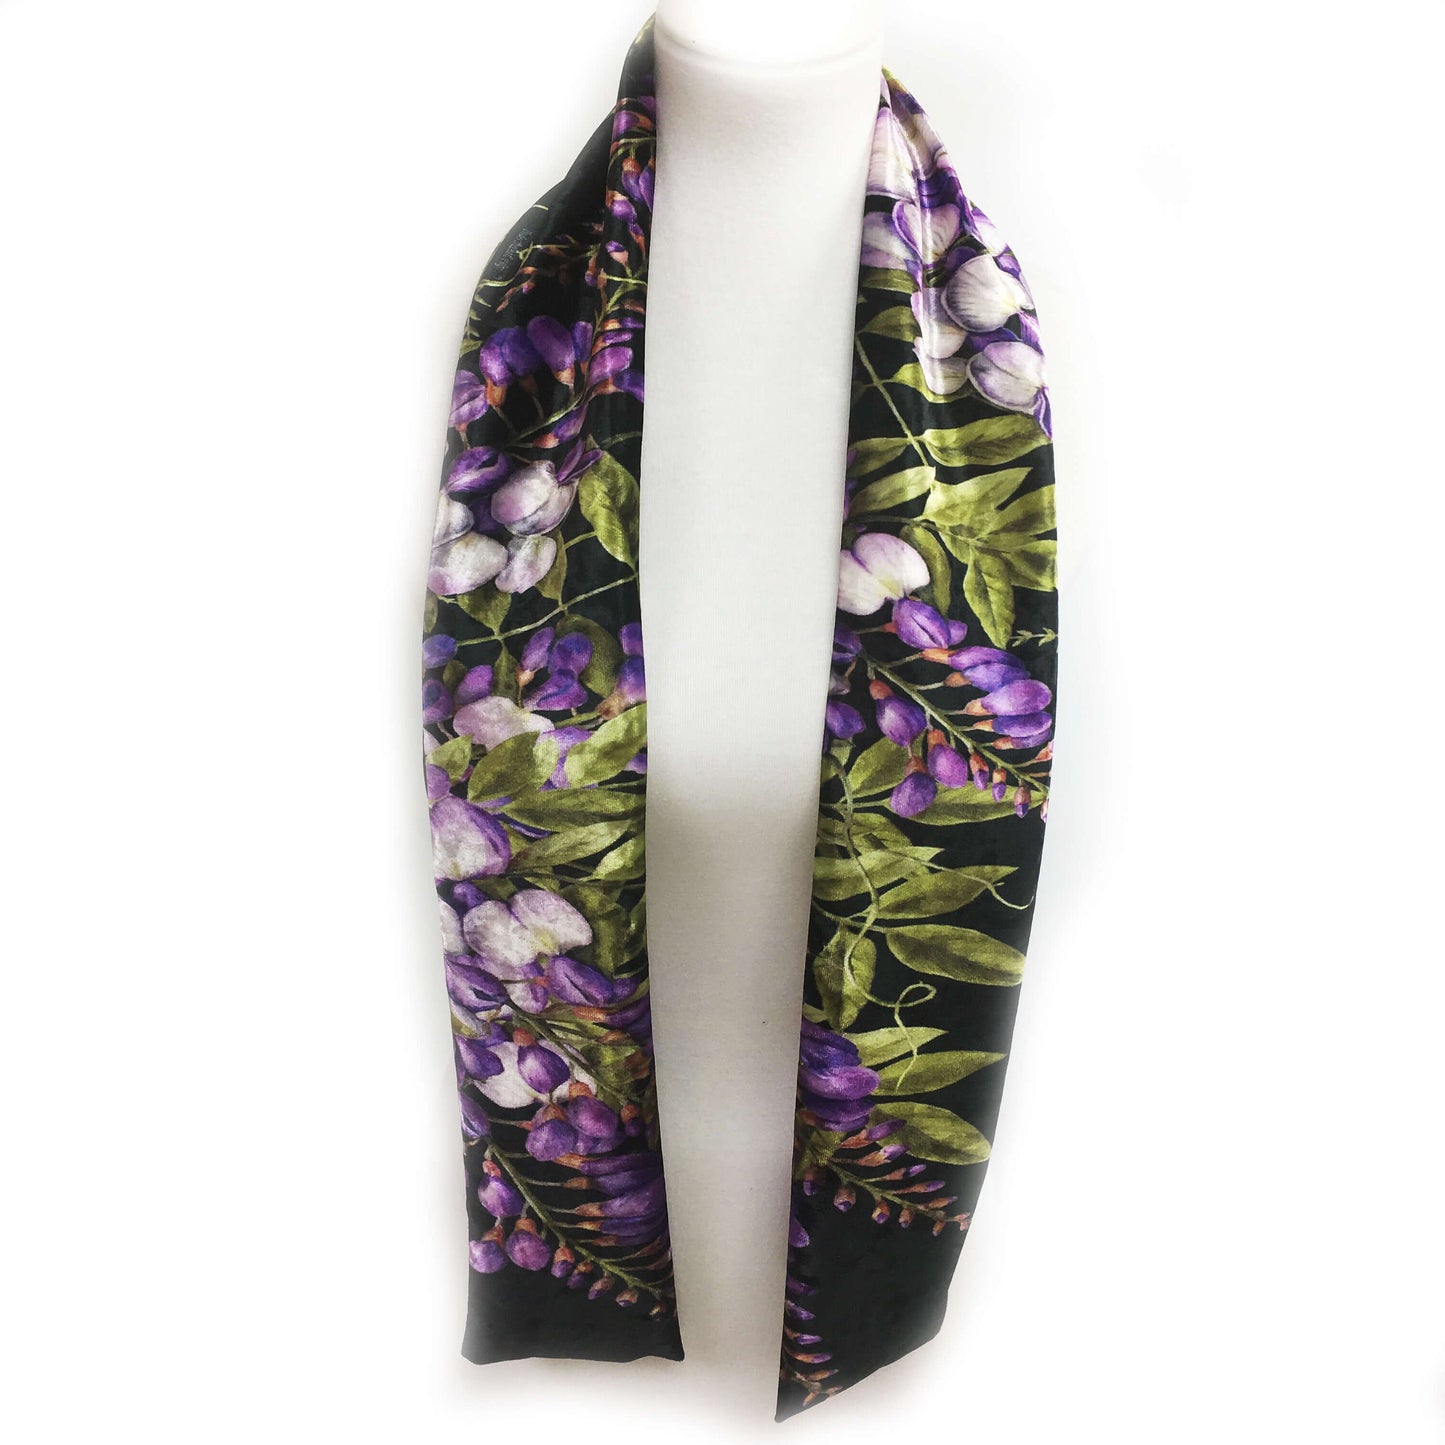 Wisteria Velour Scarf, Womans Scarf, All season, Luminous Scarf, hand painted scarf, artist scarf, Wear all day or evening